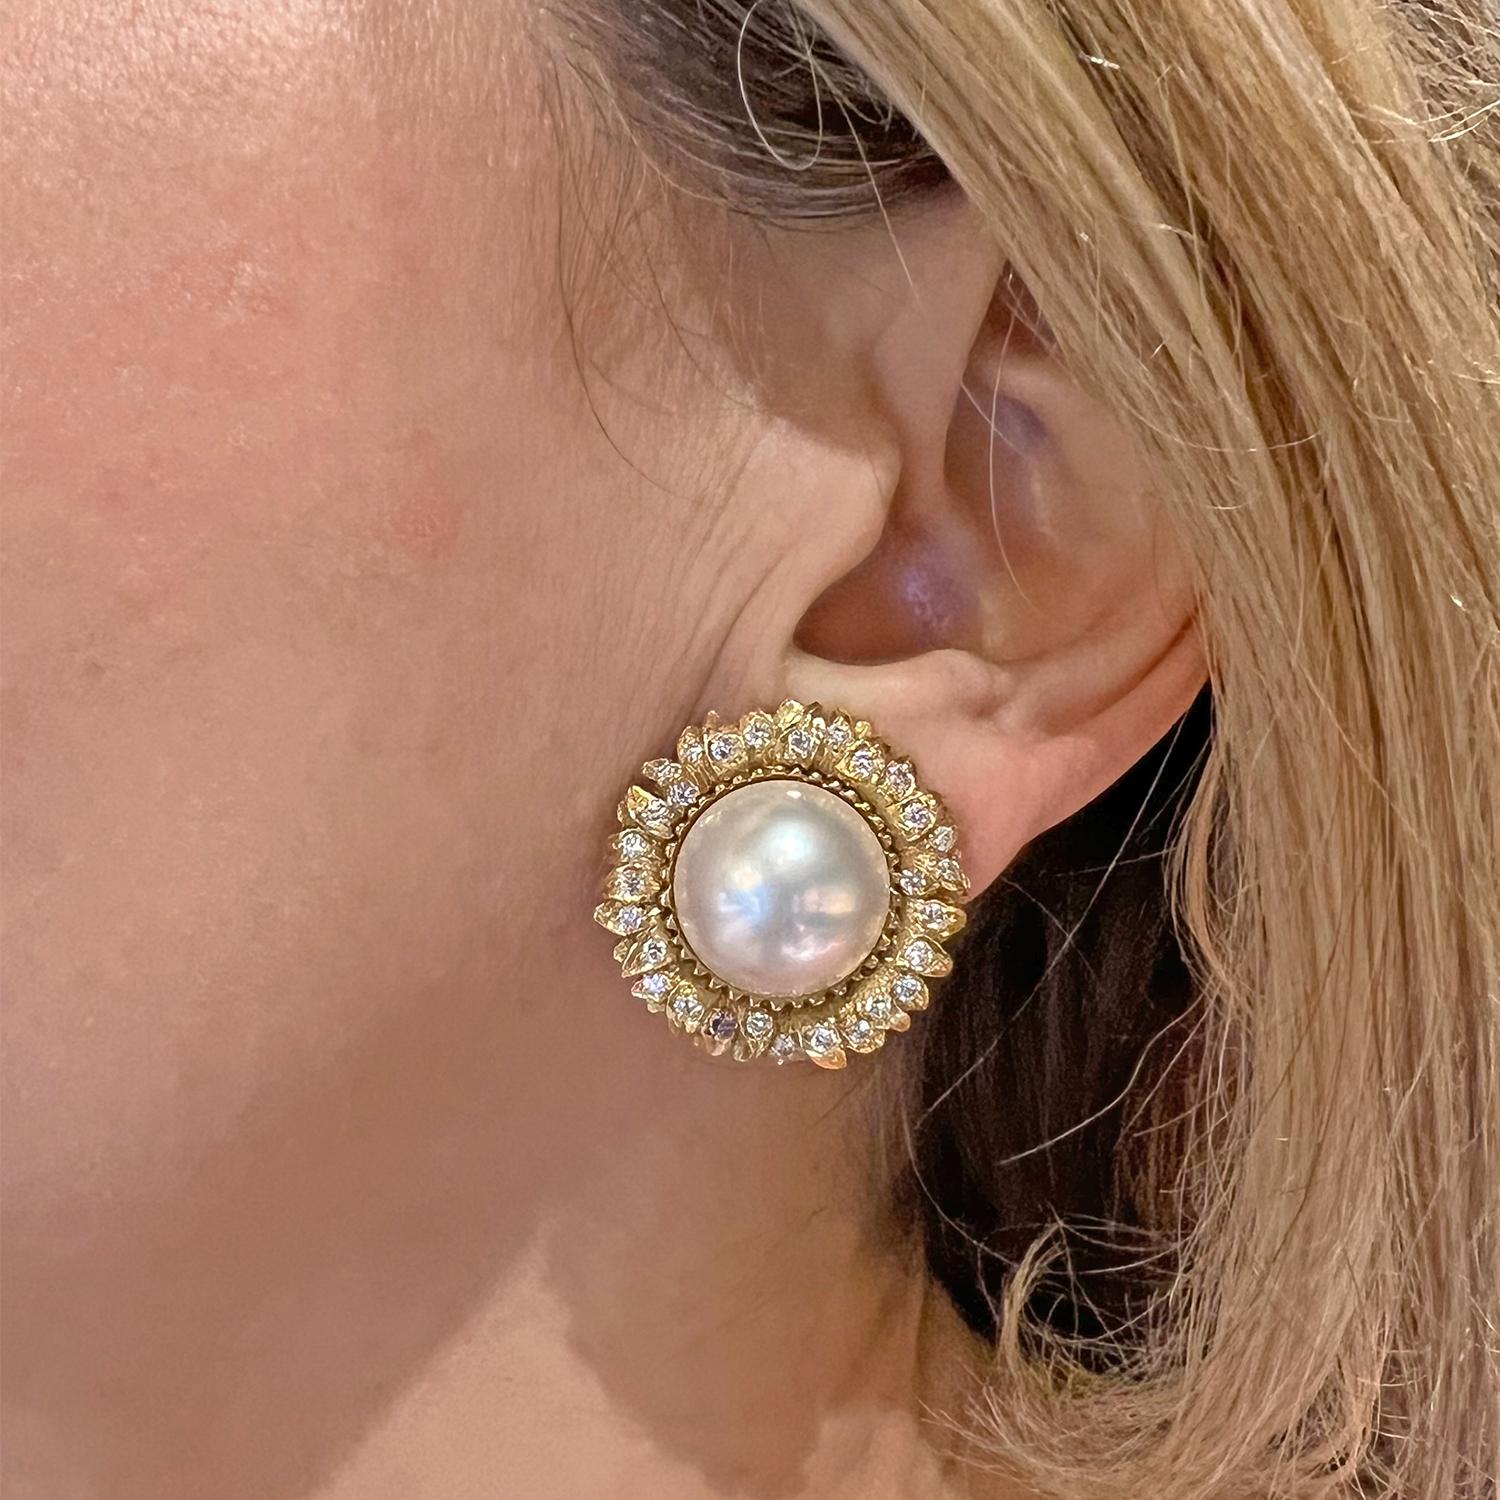 18-karat yellow gold sunflower earrings by renowned designer Robert Bruce Bielka. These exquisite earrings boast a central mabe pearl, encircled by twenty-eight round brilliant-cut diamonds, creating a sparkling sunflower motif.

Measuring